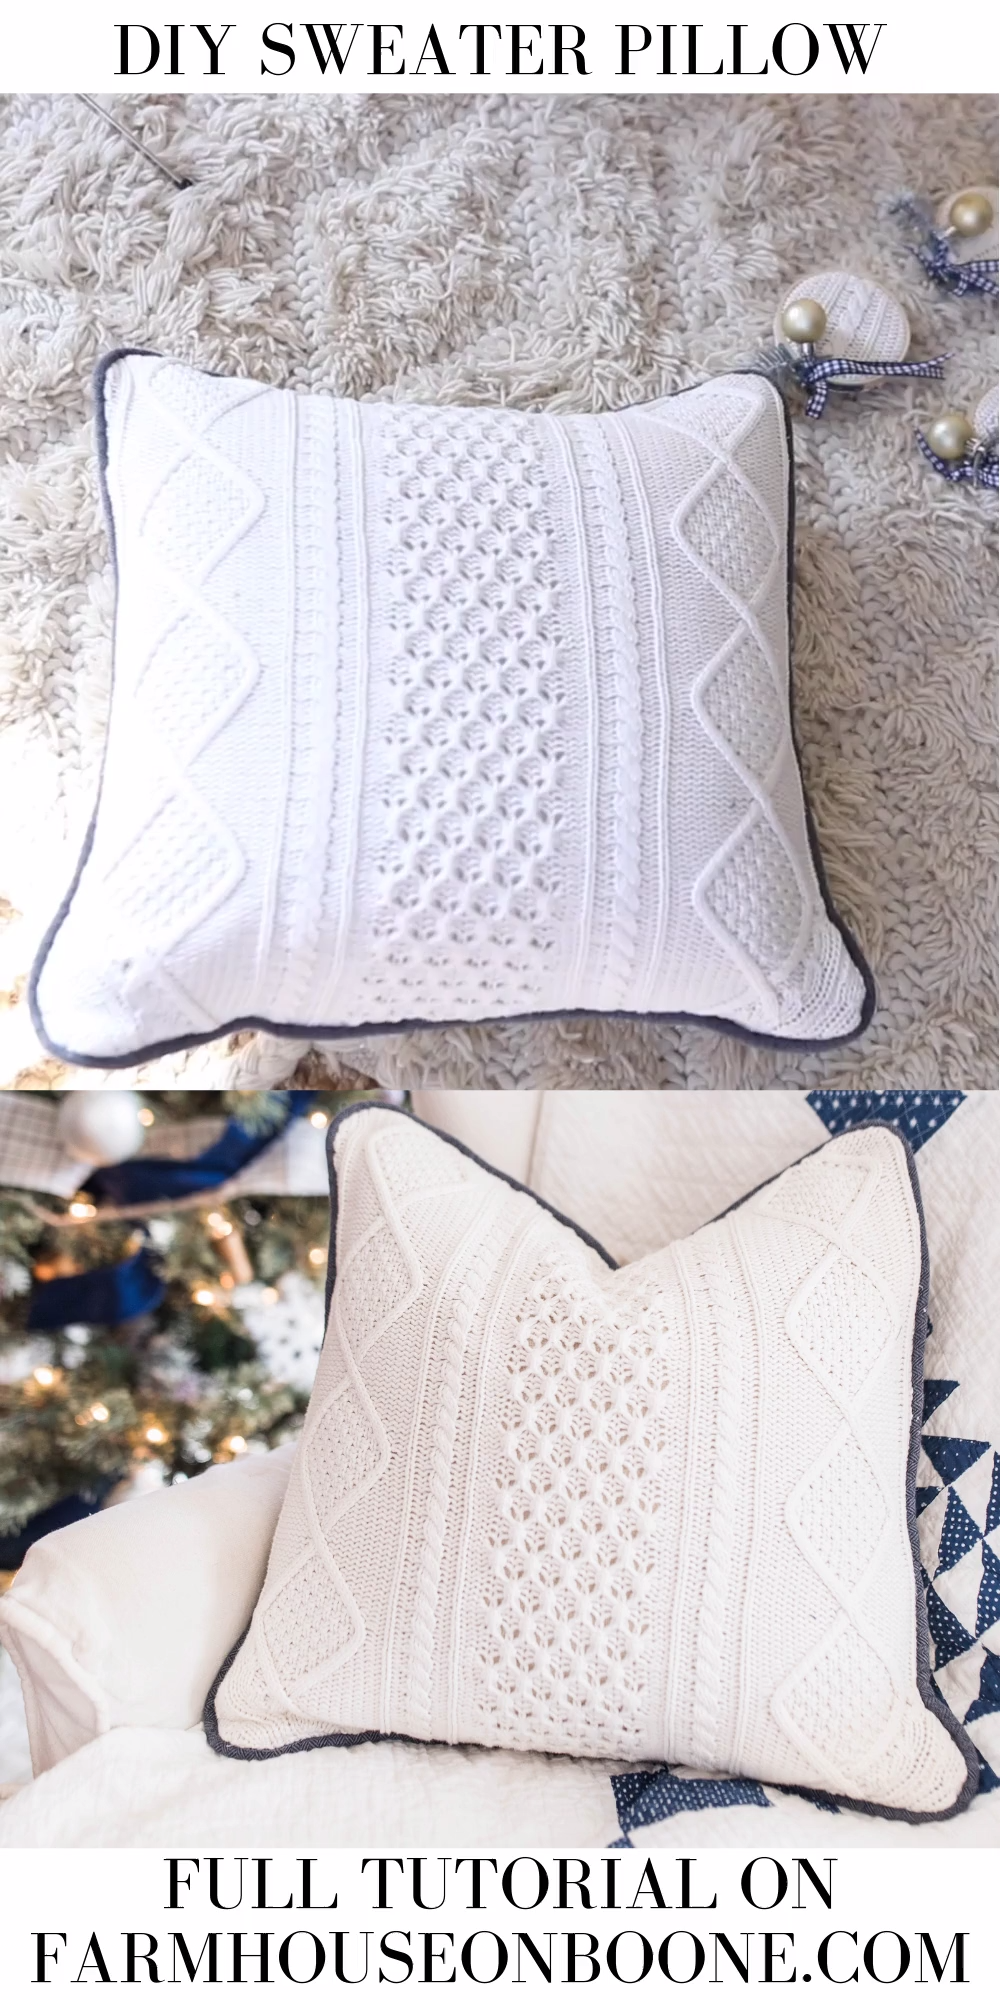 How To Make A Pillow From A Sweater - How To Make A Pillow From A Sweater -   18 beauty DIY sewing ideas